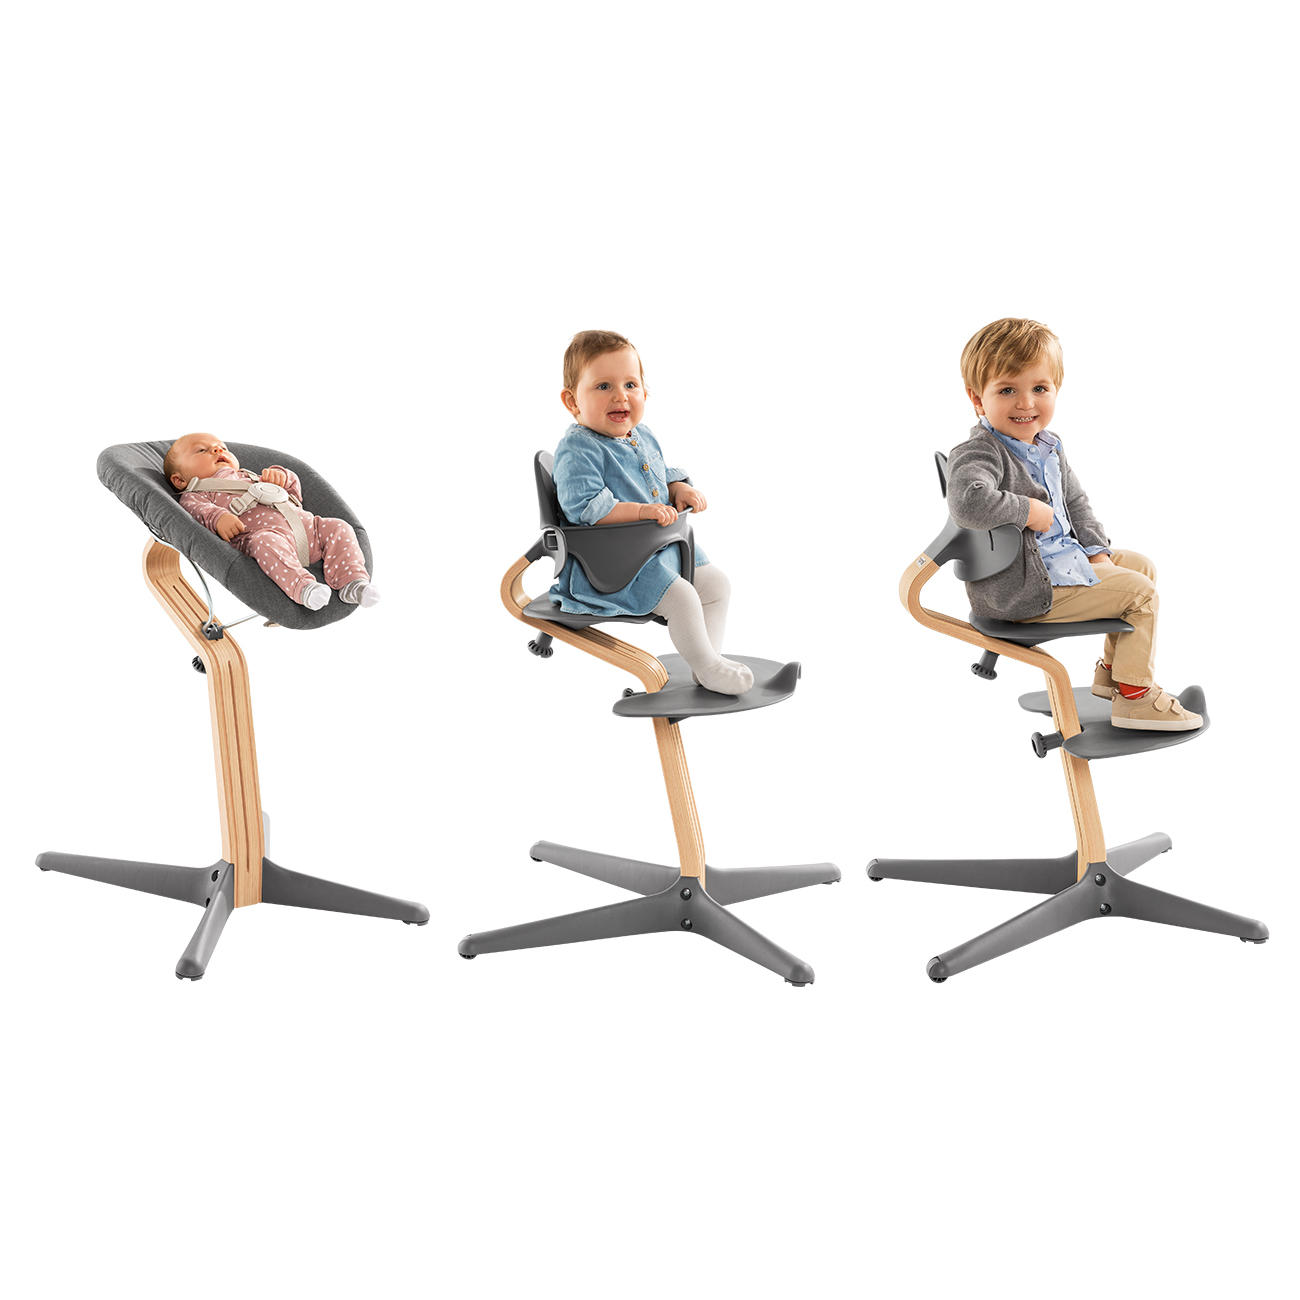 Children’s High Chair Nomi 3year product guarantee